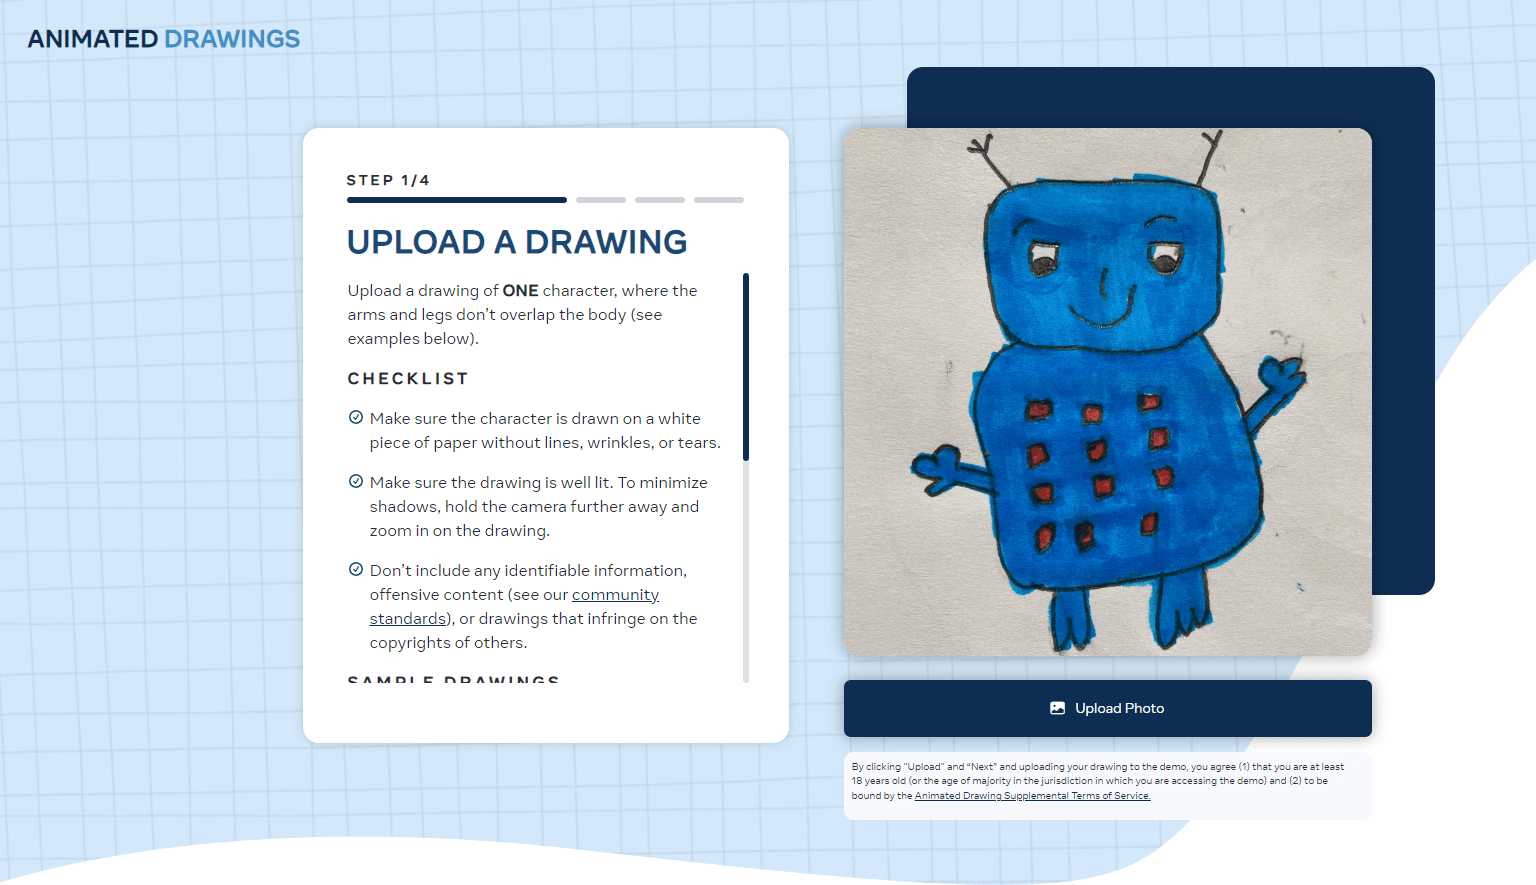 Sketch homepage with an image of a blue monster drawing